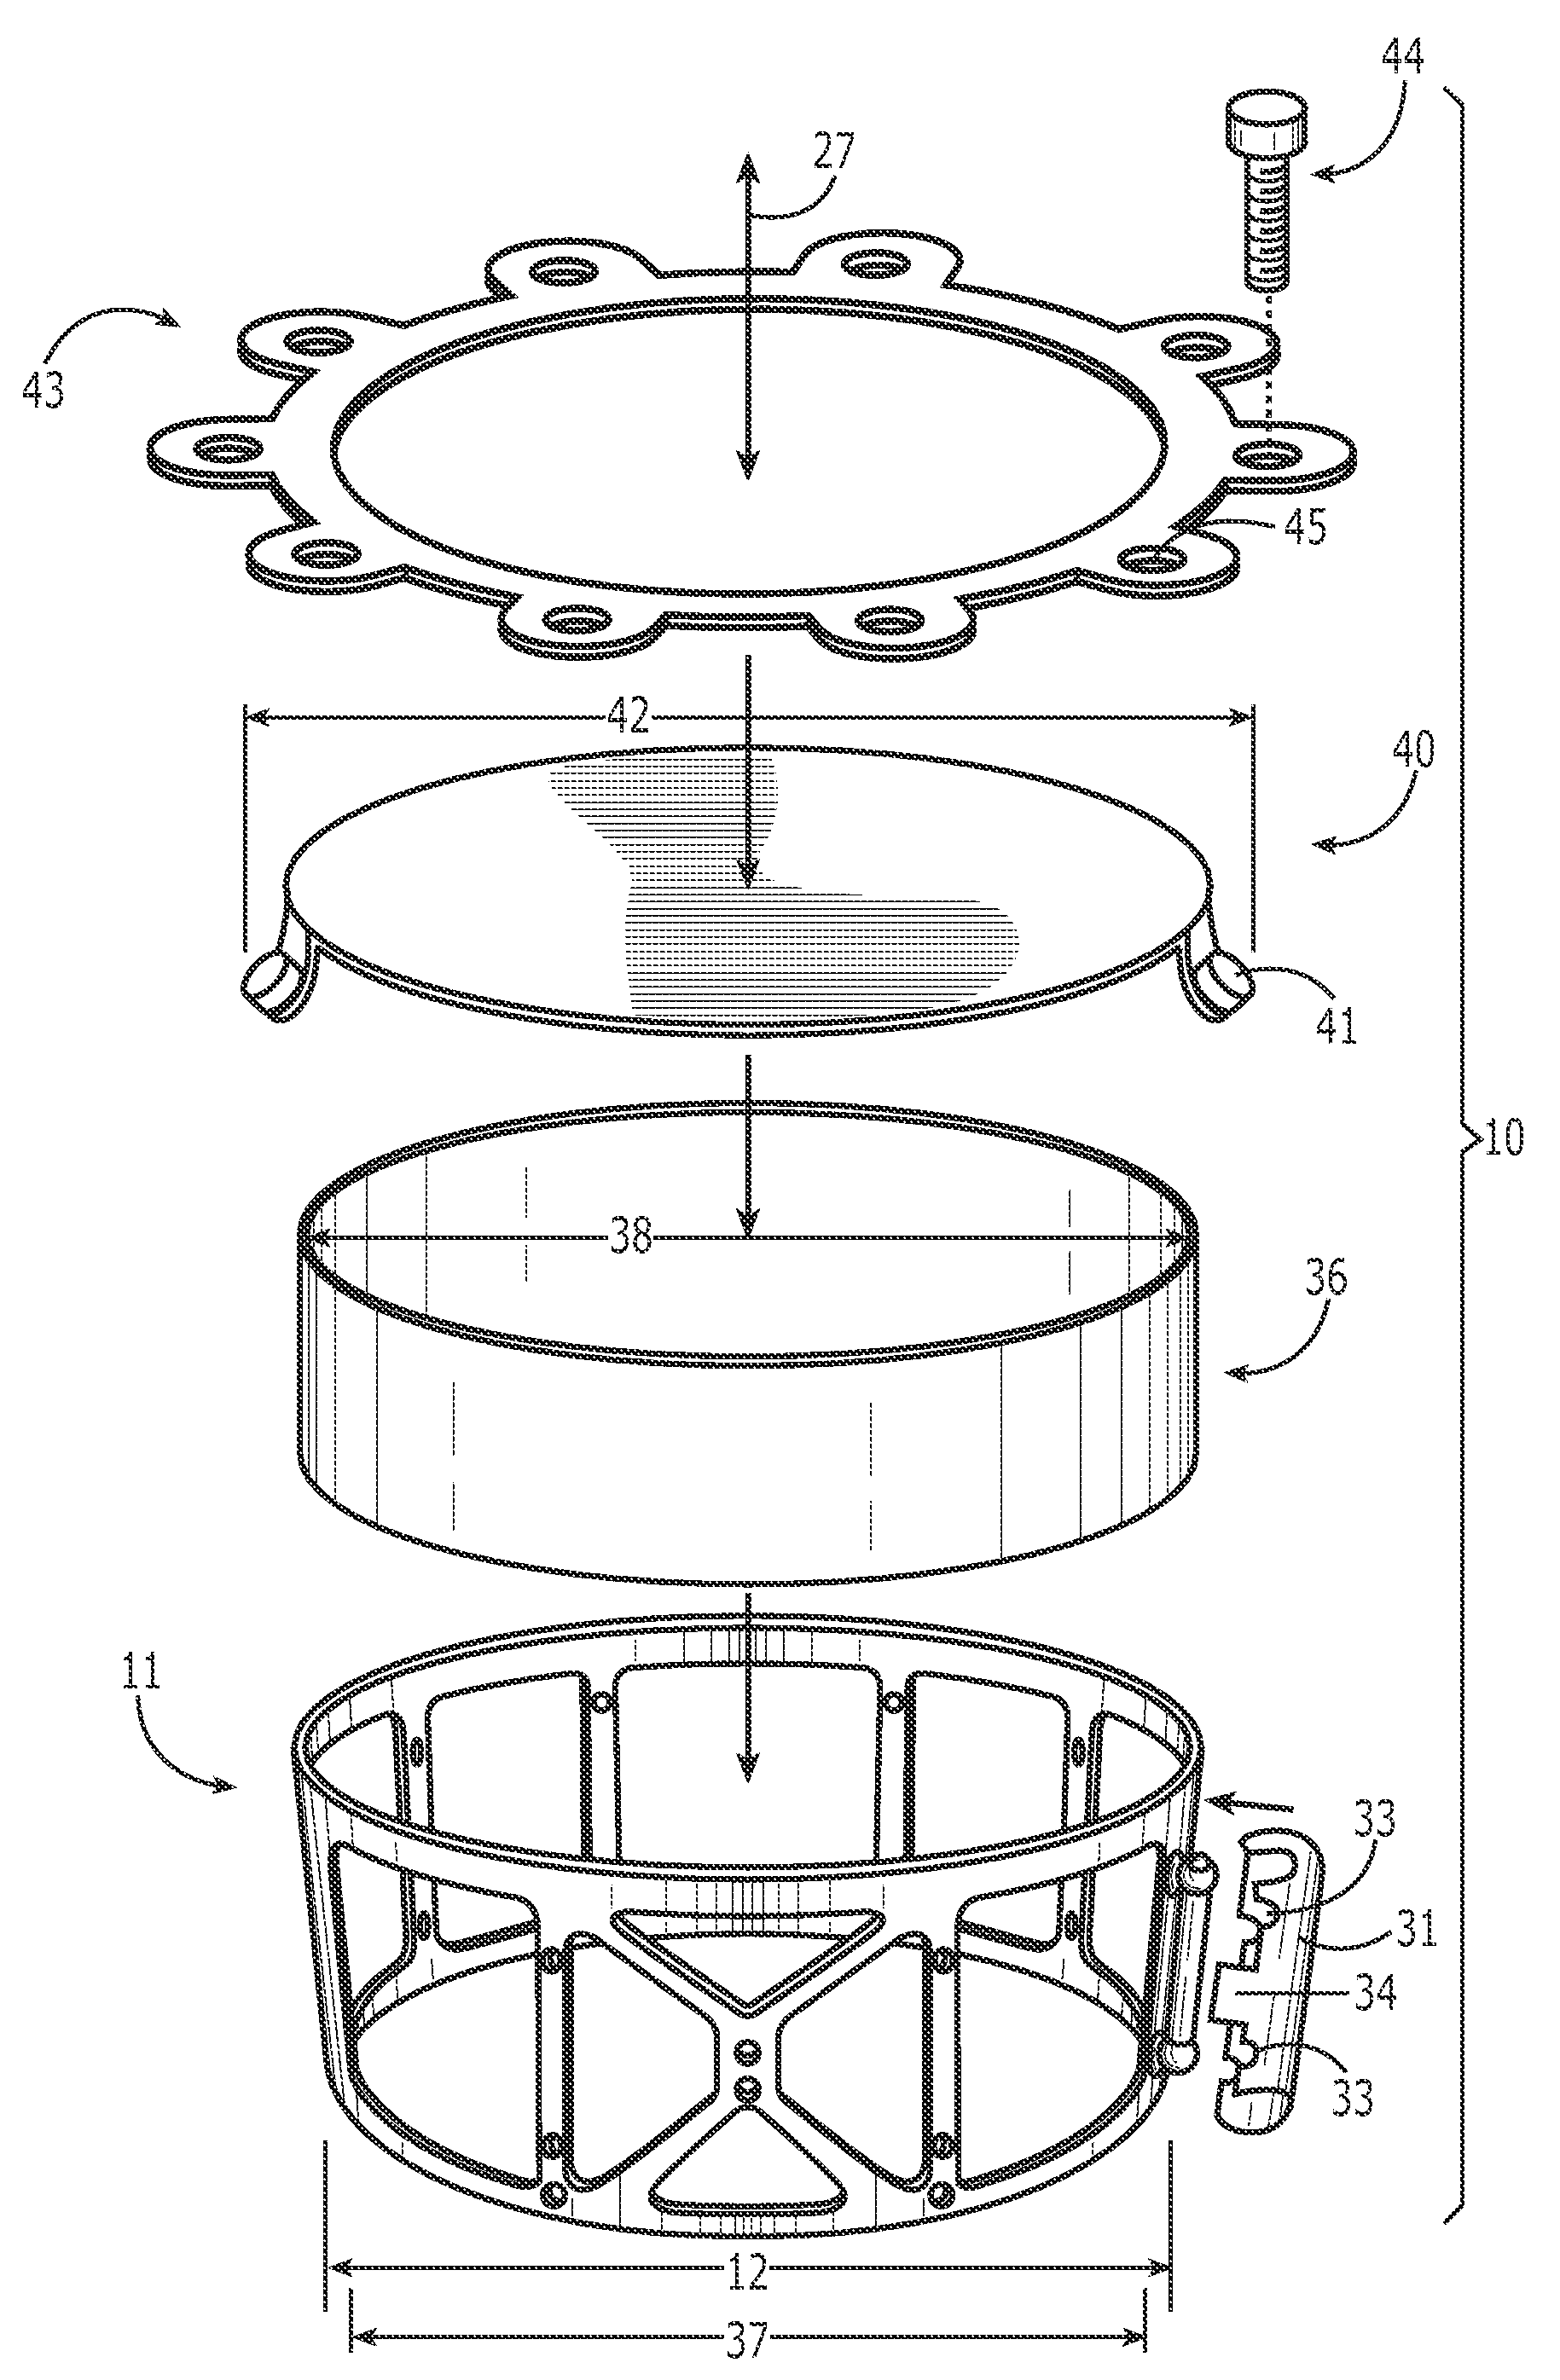 Drum shell mounting system and associated methods